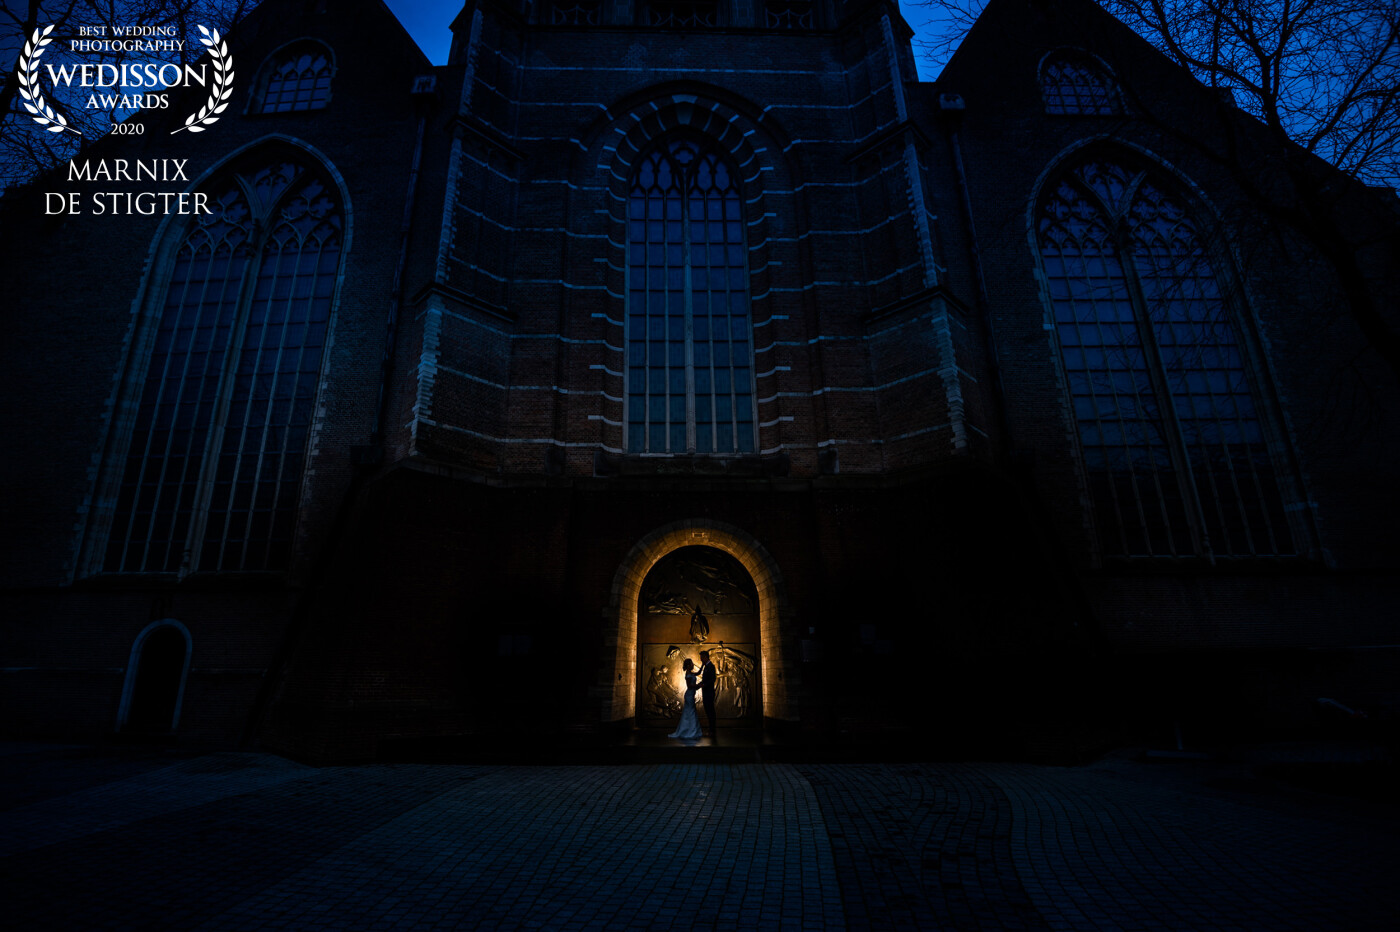 In this shot, the beautiful brass door of the Laurenskerk in the city of Rotterdam played a central role. The cold winter weather combined with the warm light behind the couple made for a nice contrast.